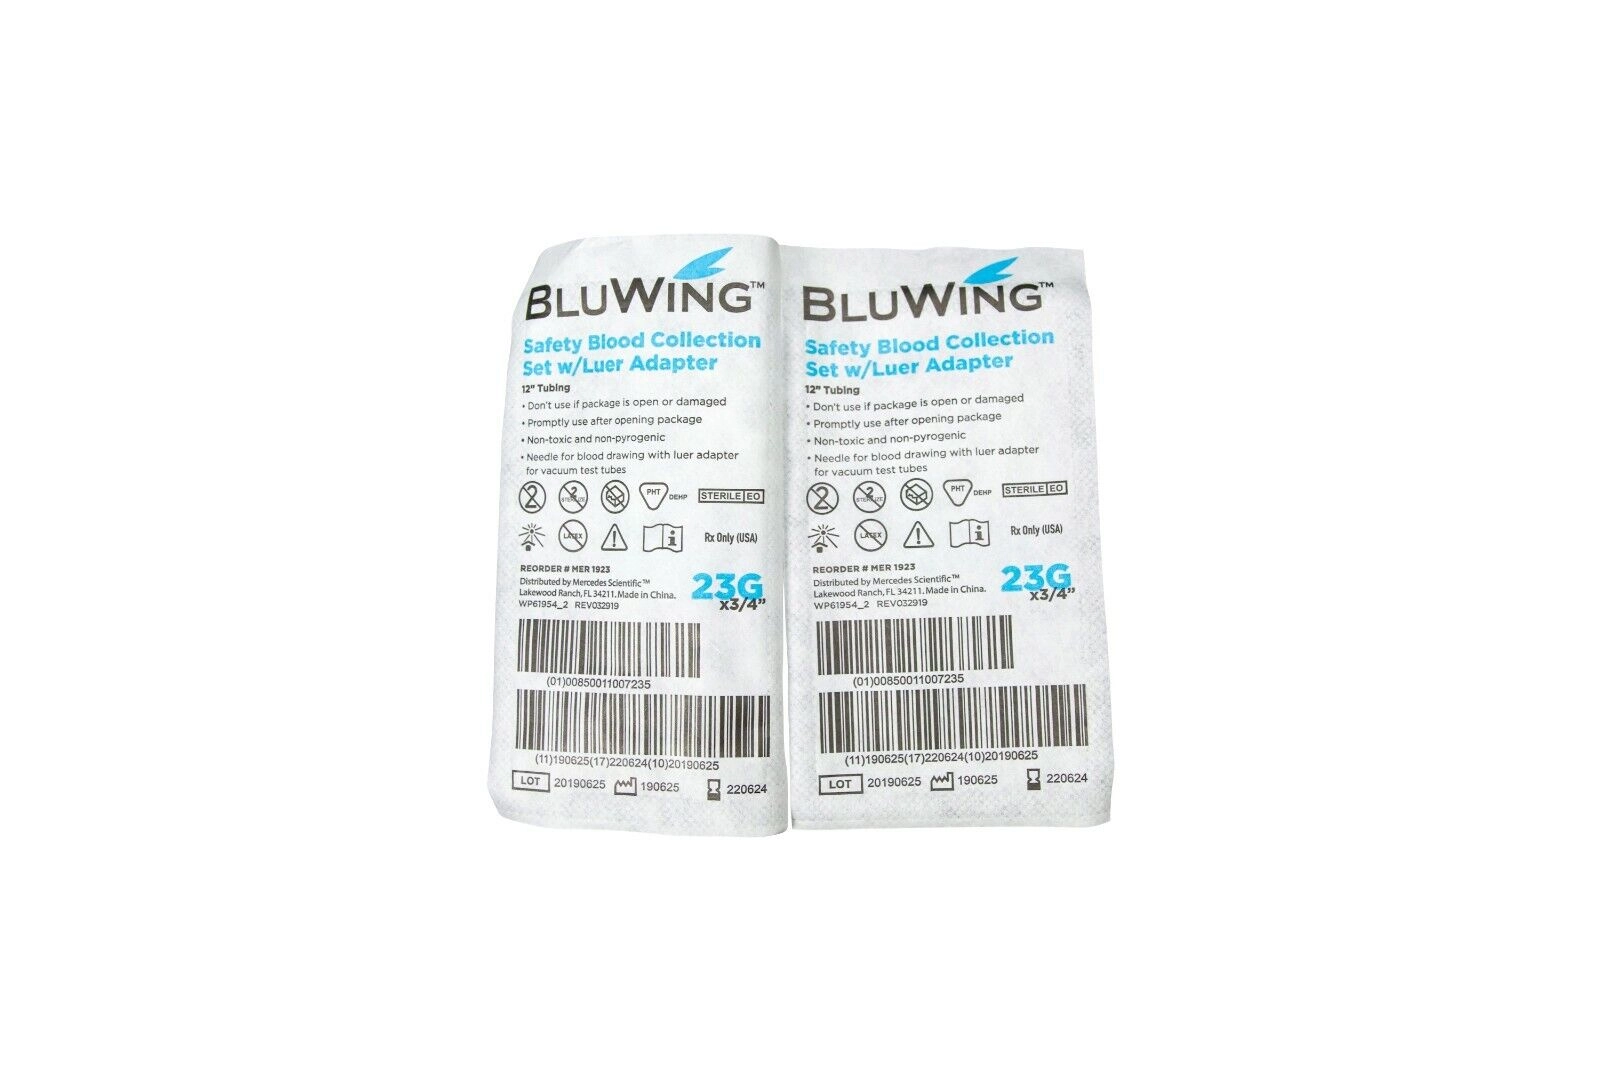 23G & 25G BLUWING SAFETY BLOOD COLLECTION SET, BUT